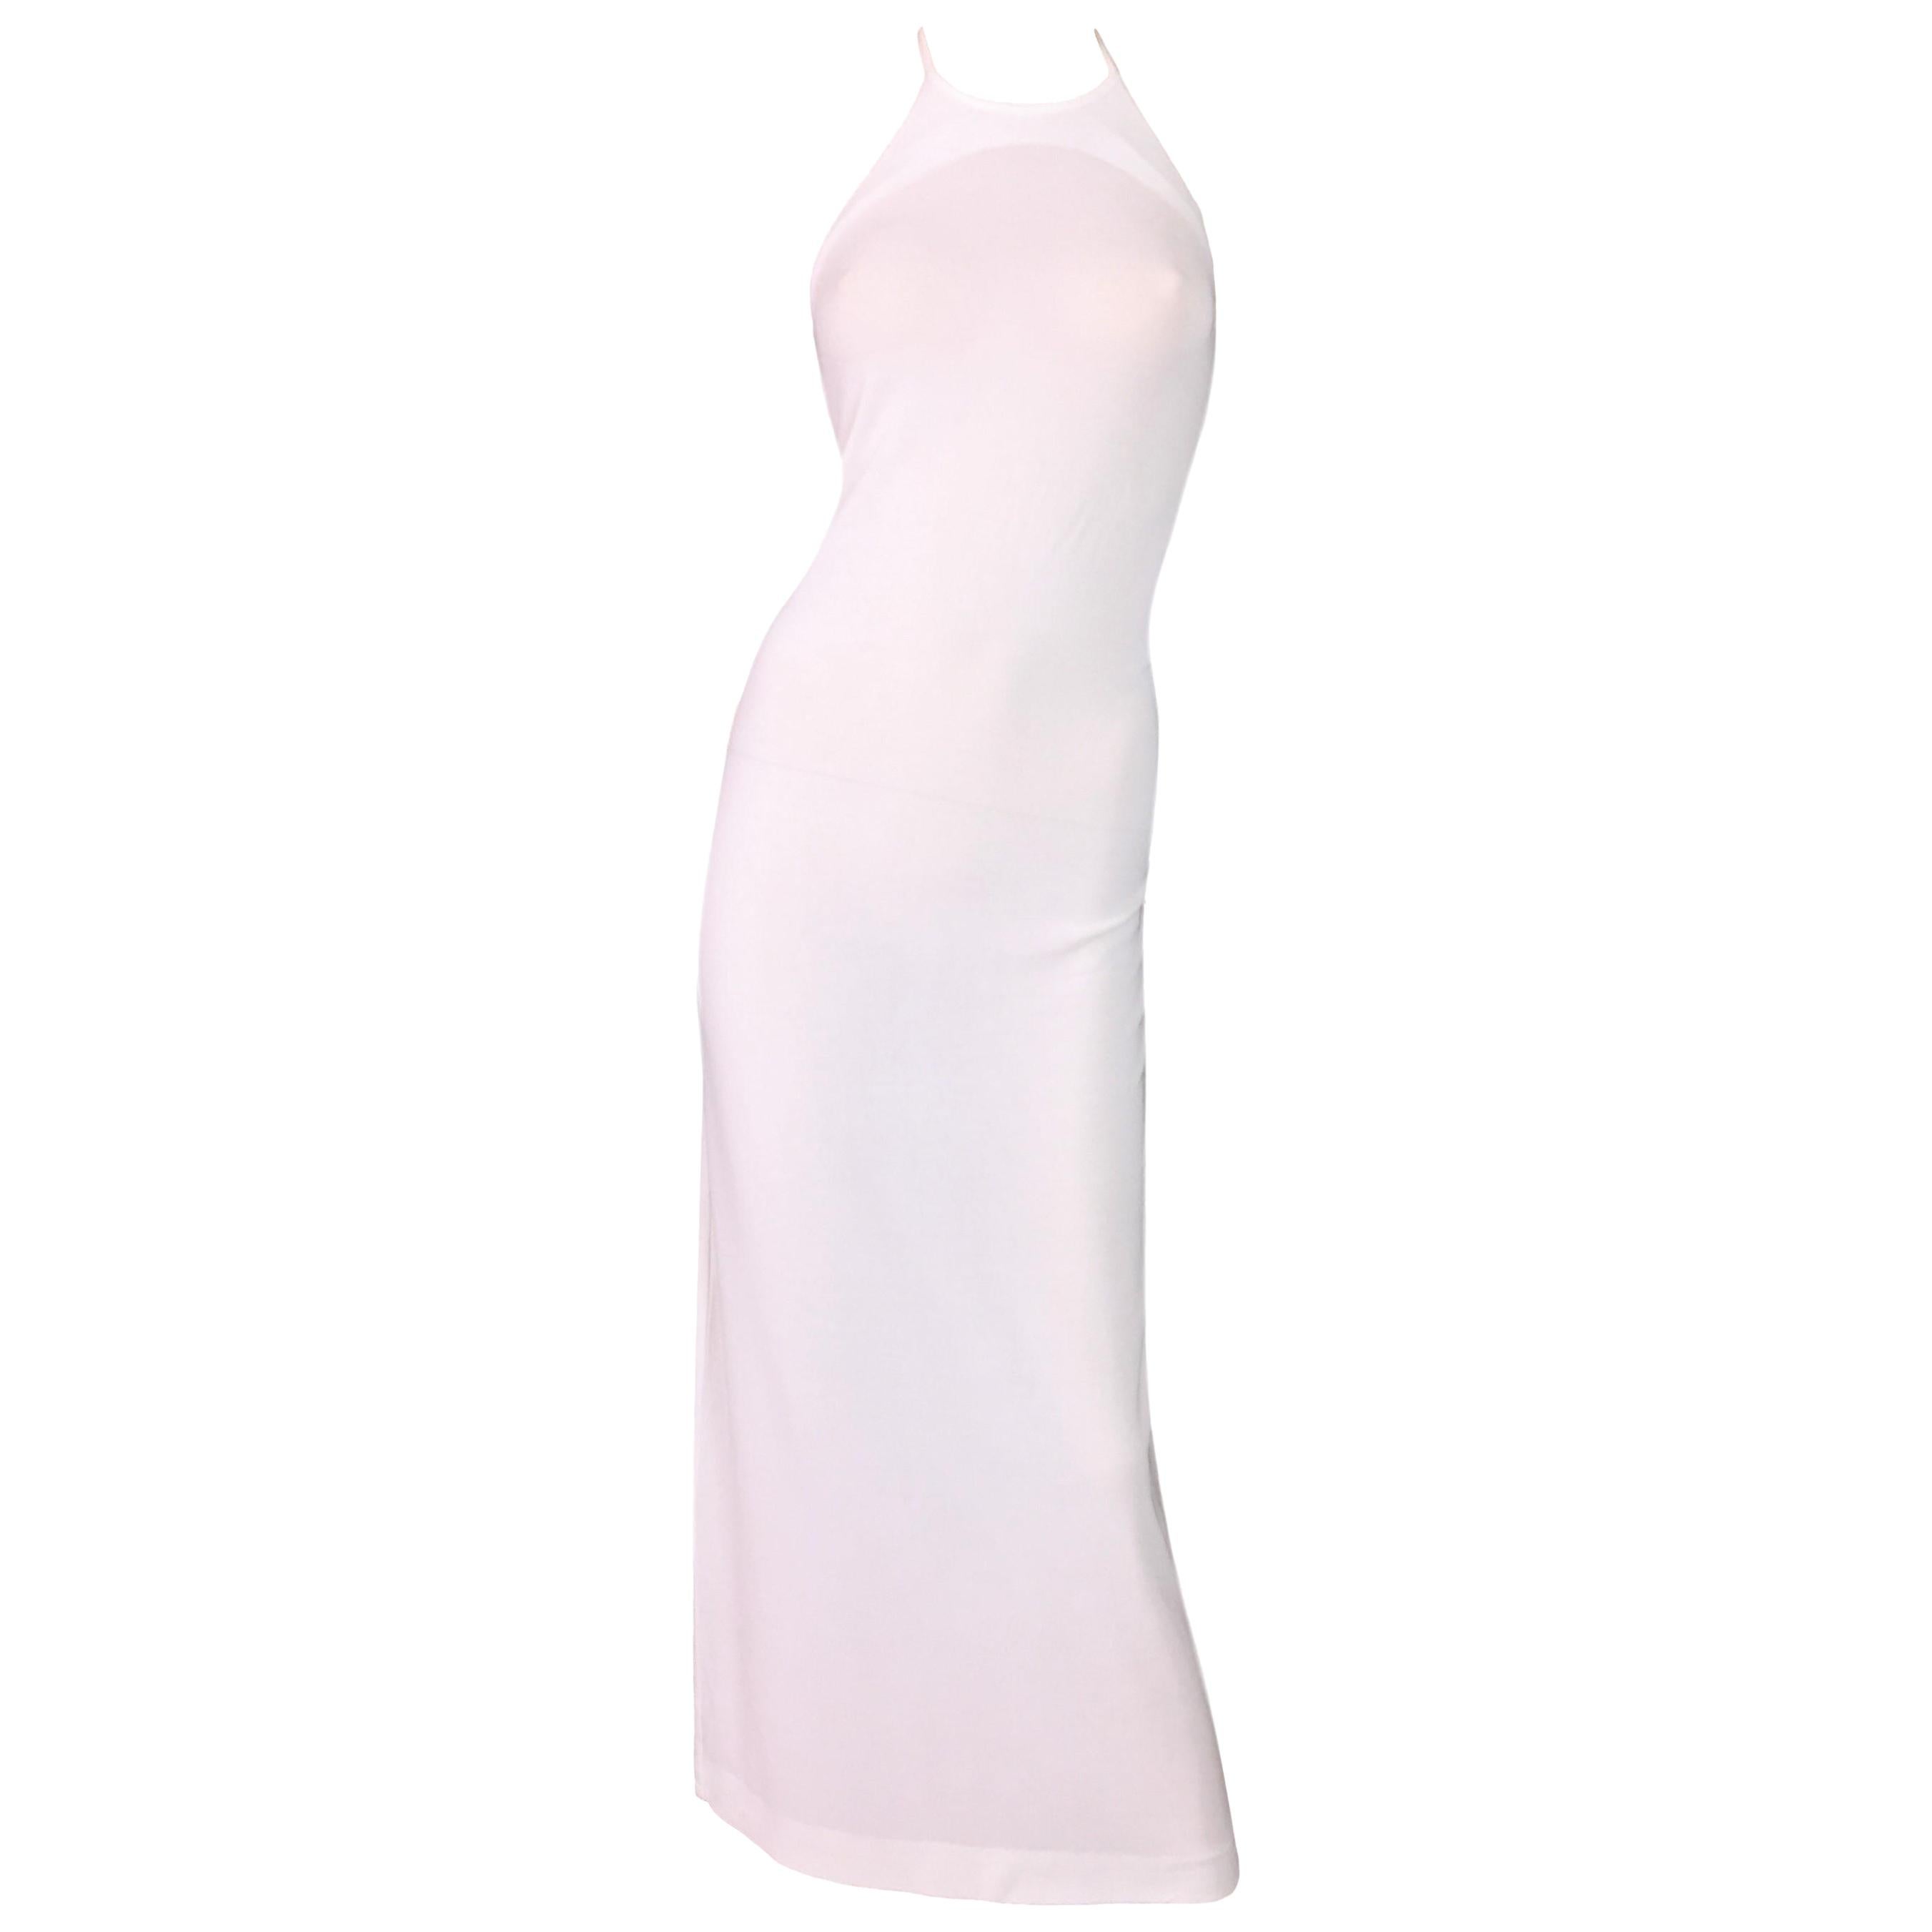 Gucci by Tom Ford Runway Sheer White Long Halter Gown Dress, F / W 1996